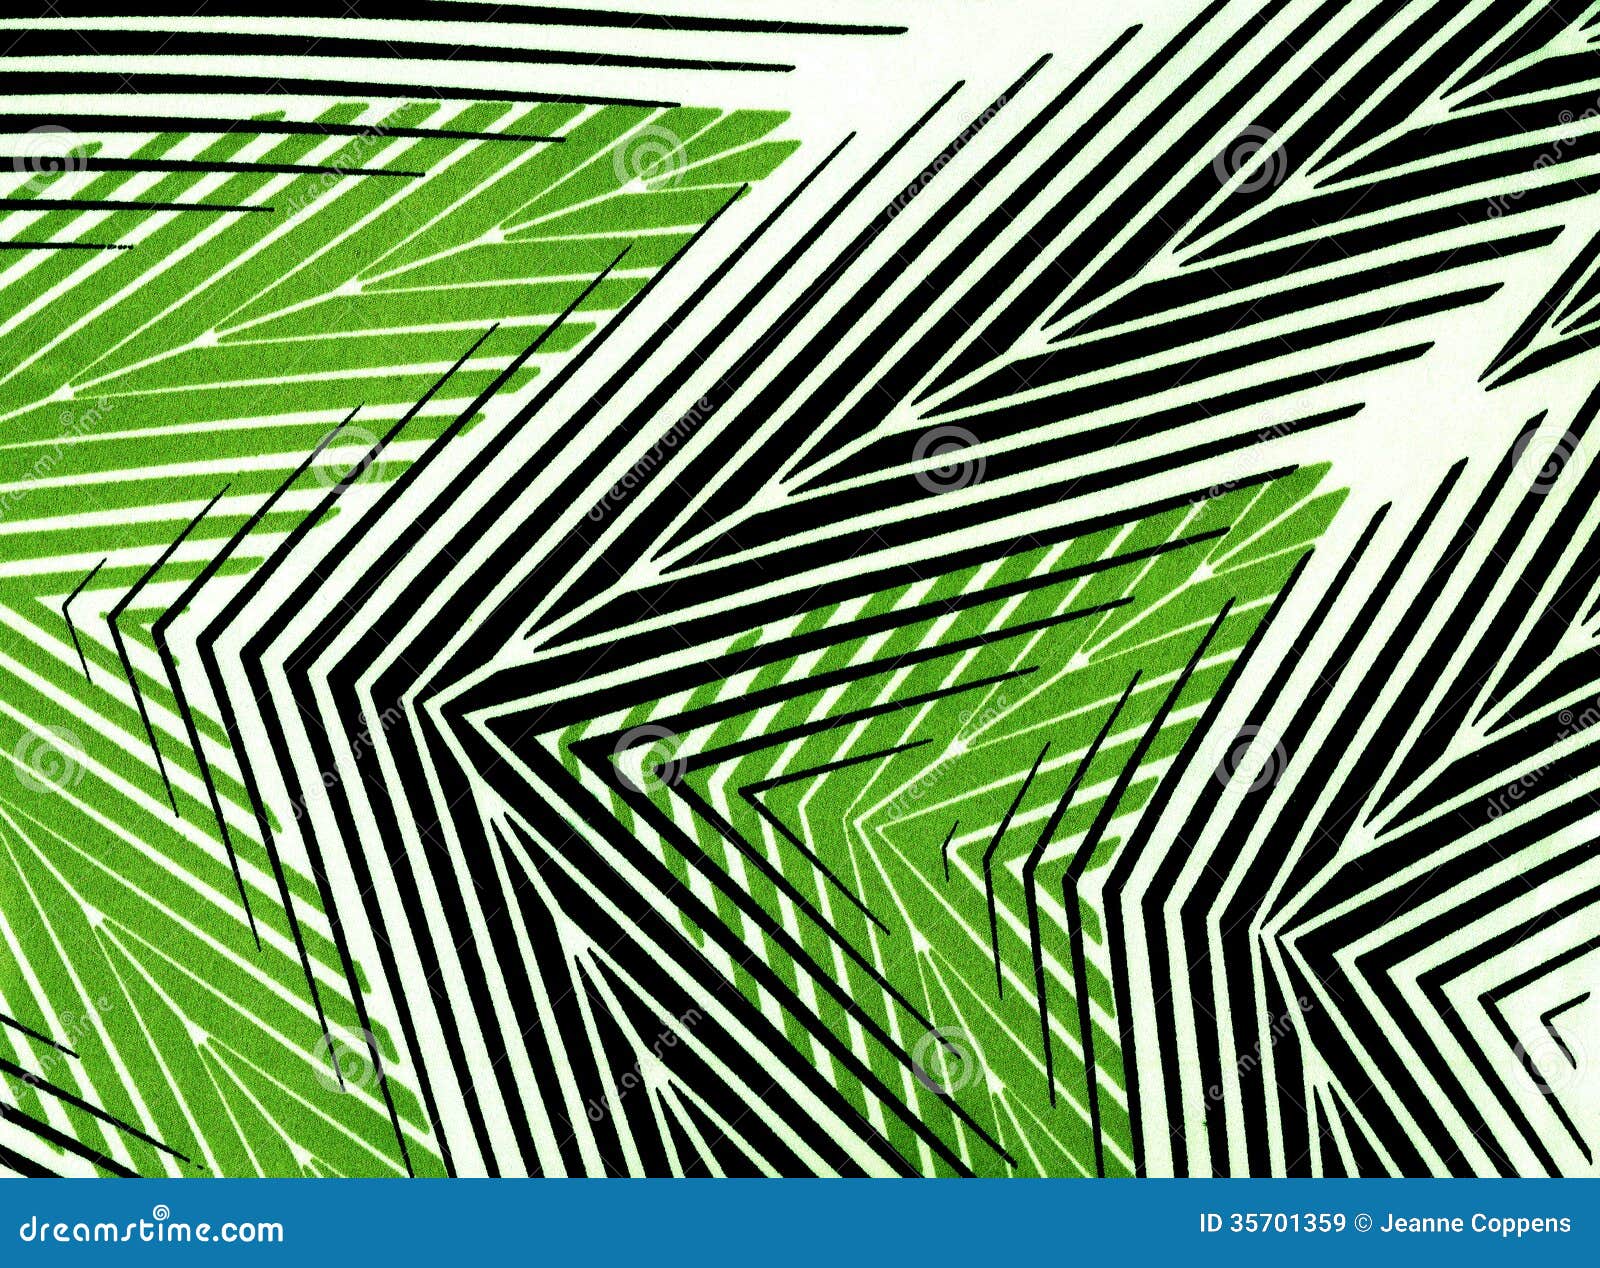 Green Stripes Vector Art Icons and Graphics for Free Download